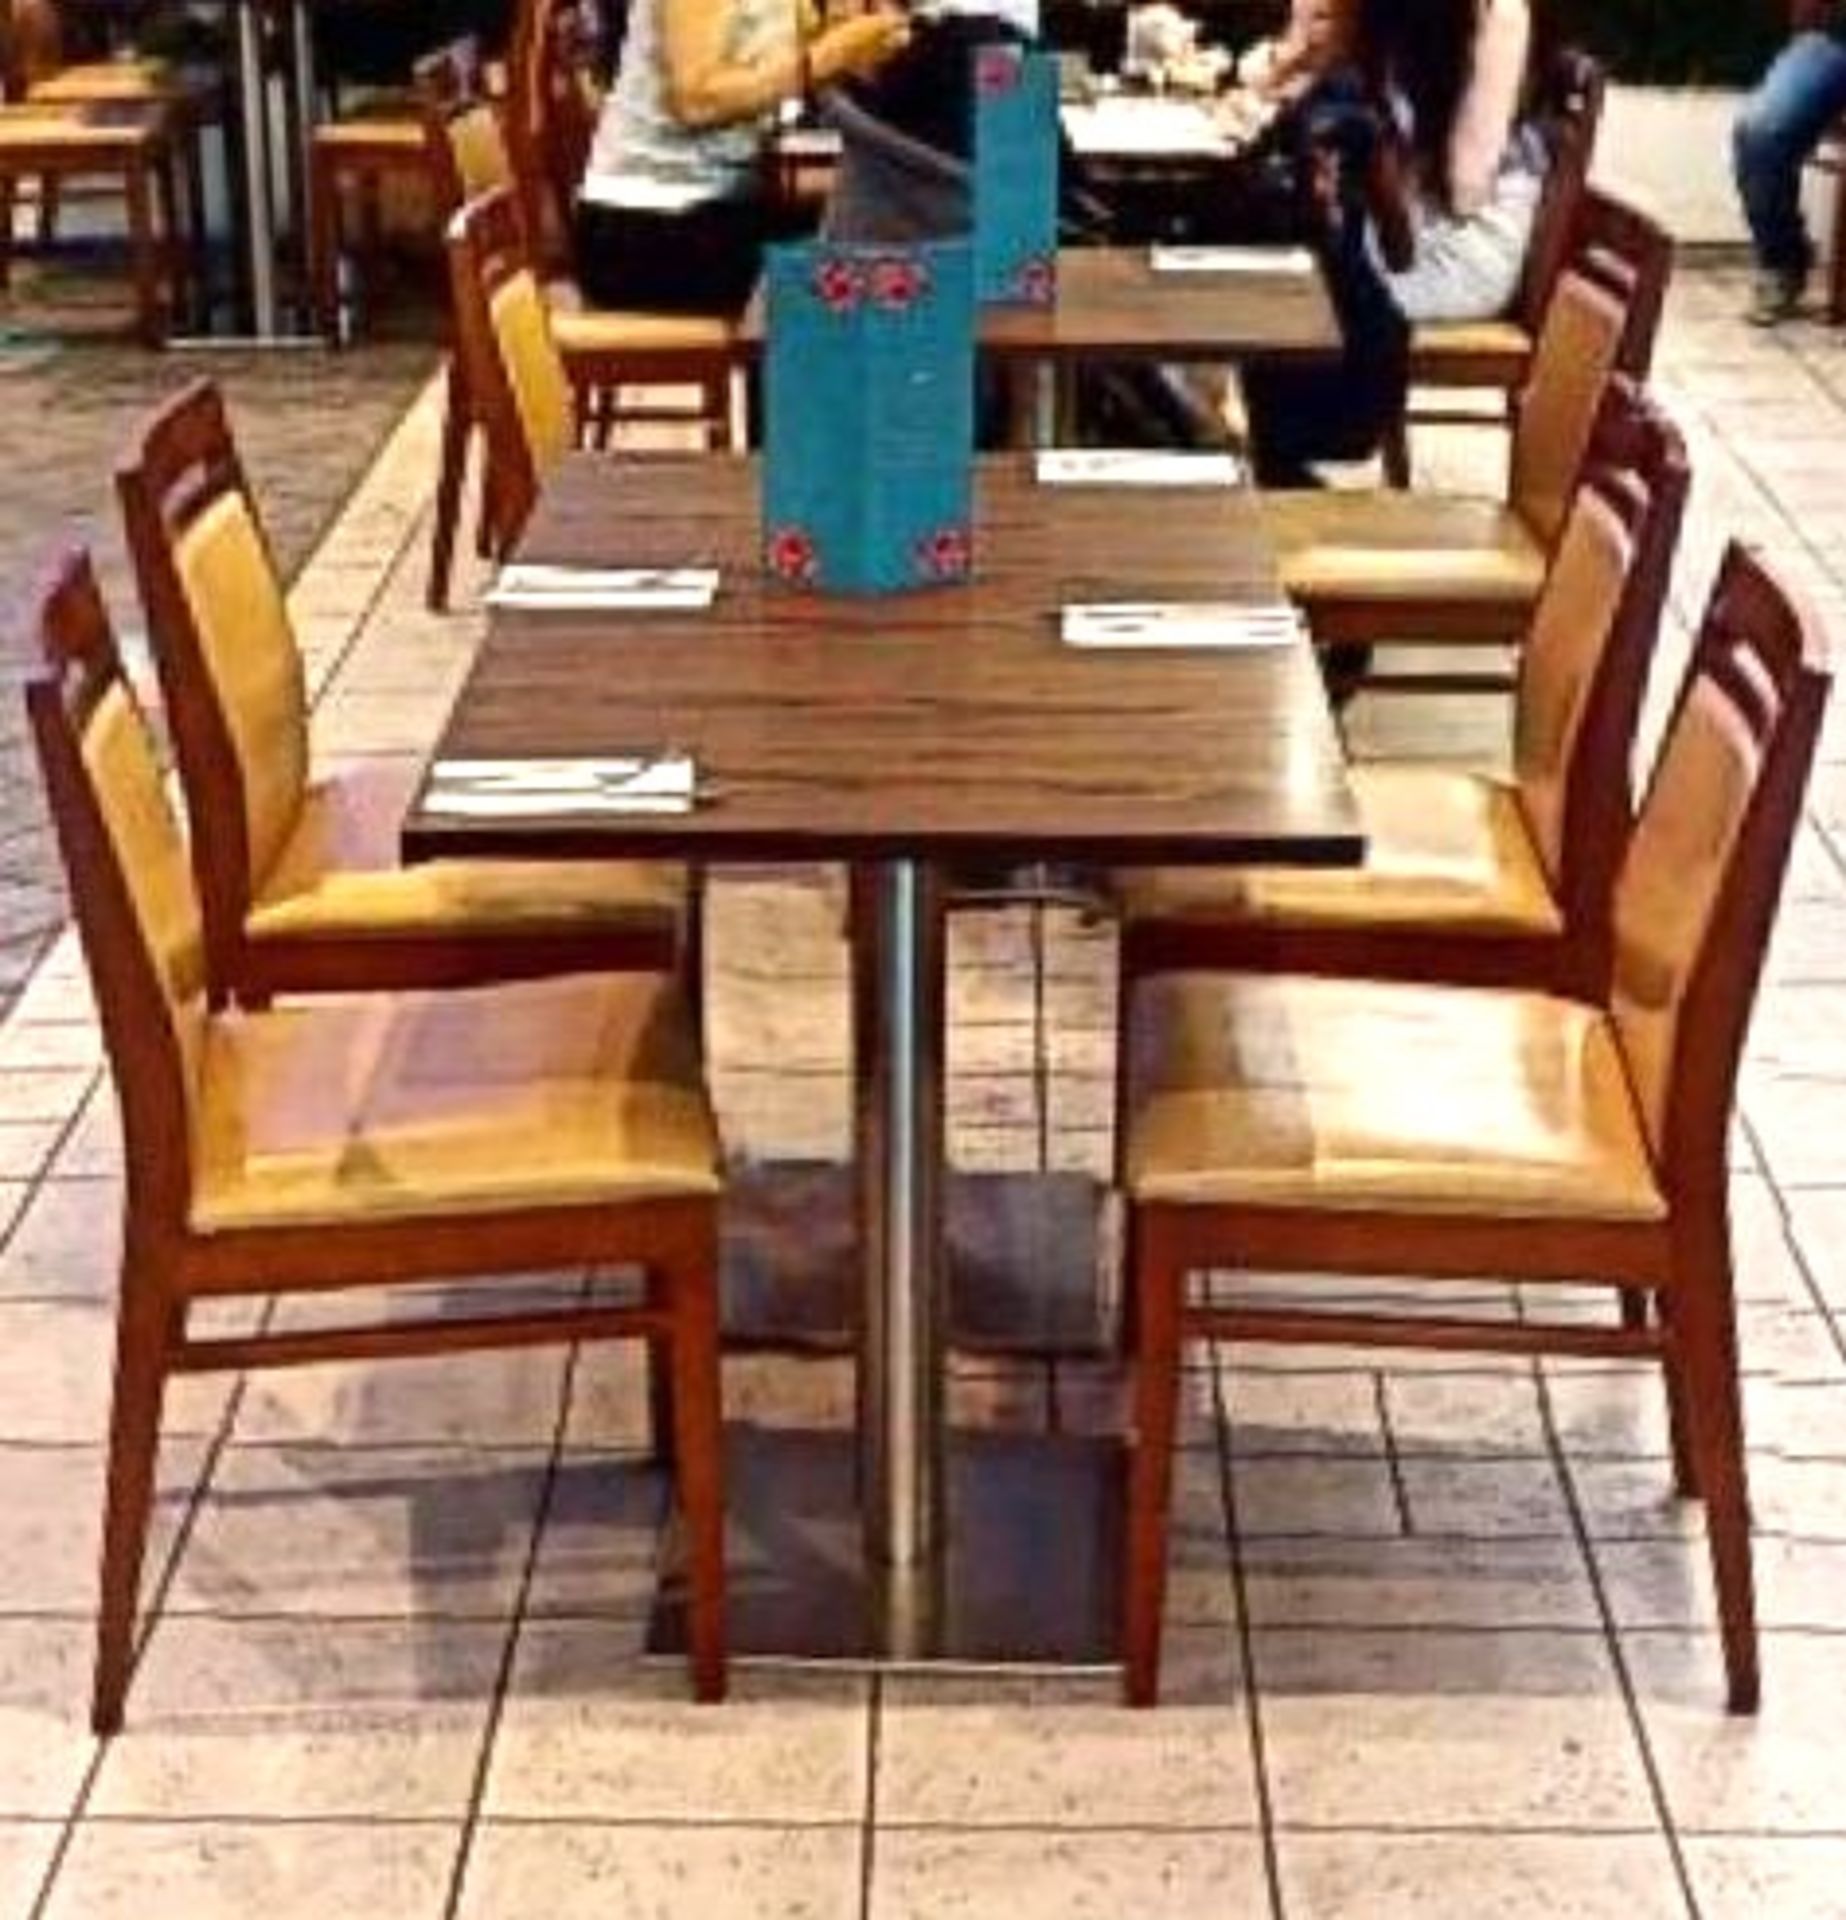 8 x High Quality Restaurant Chairs With Wooden Frames and Leather Seat Pads - Image 4 of 4